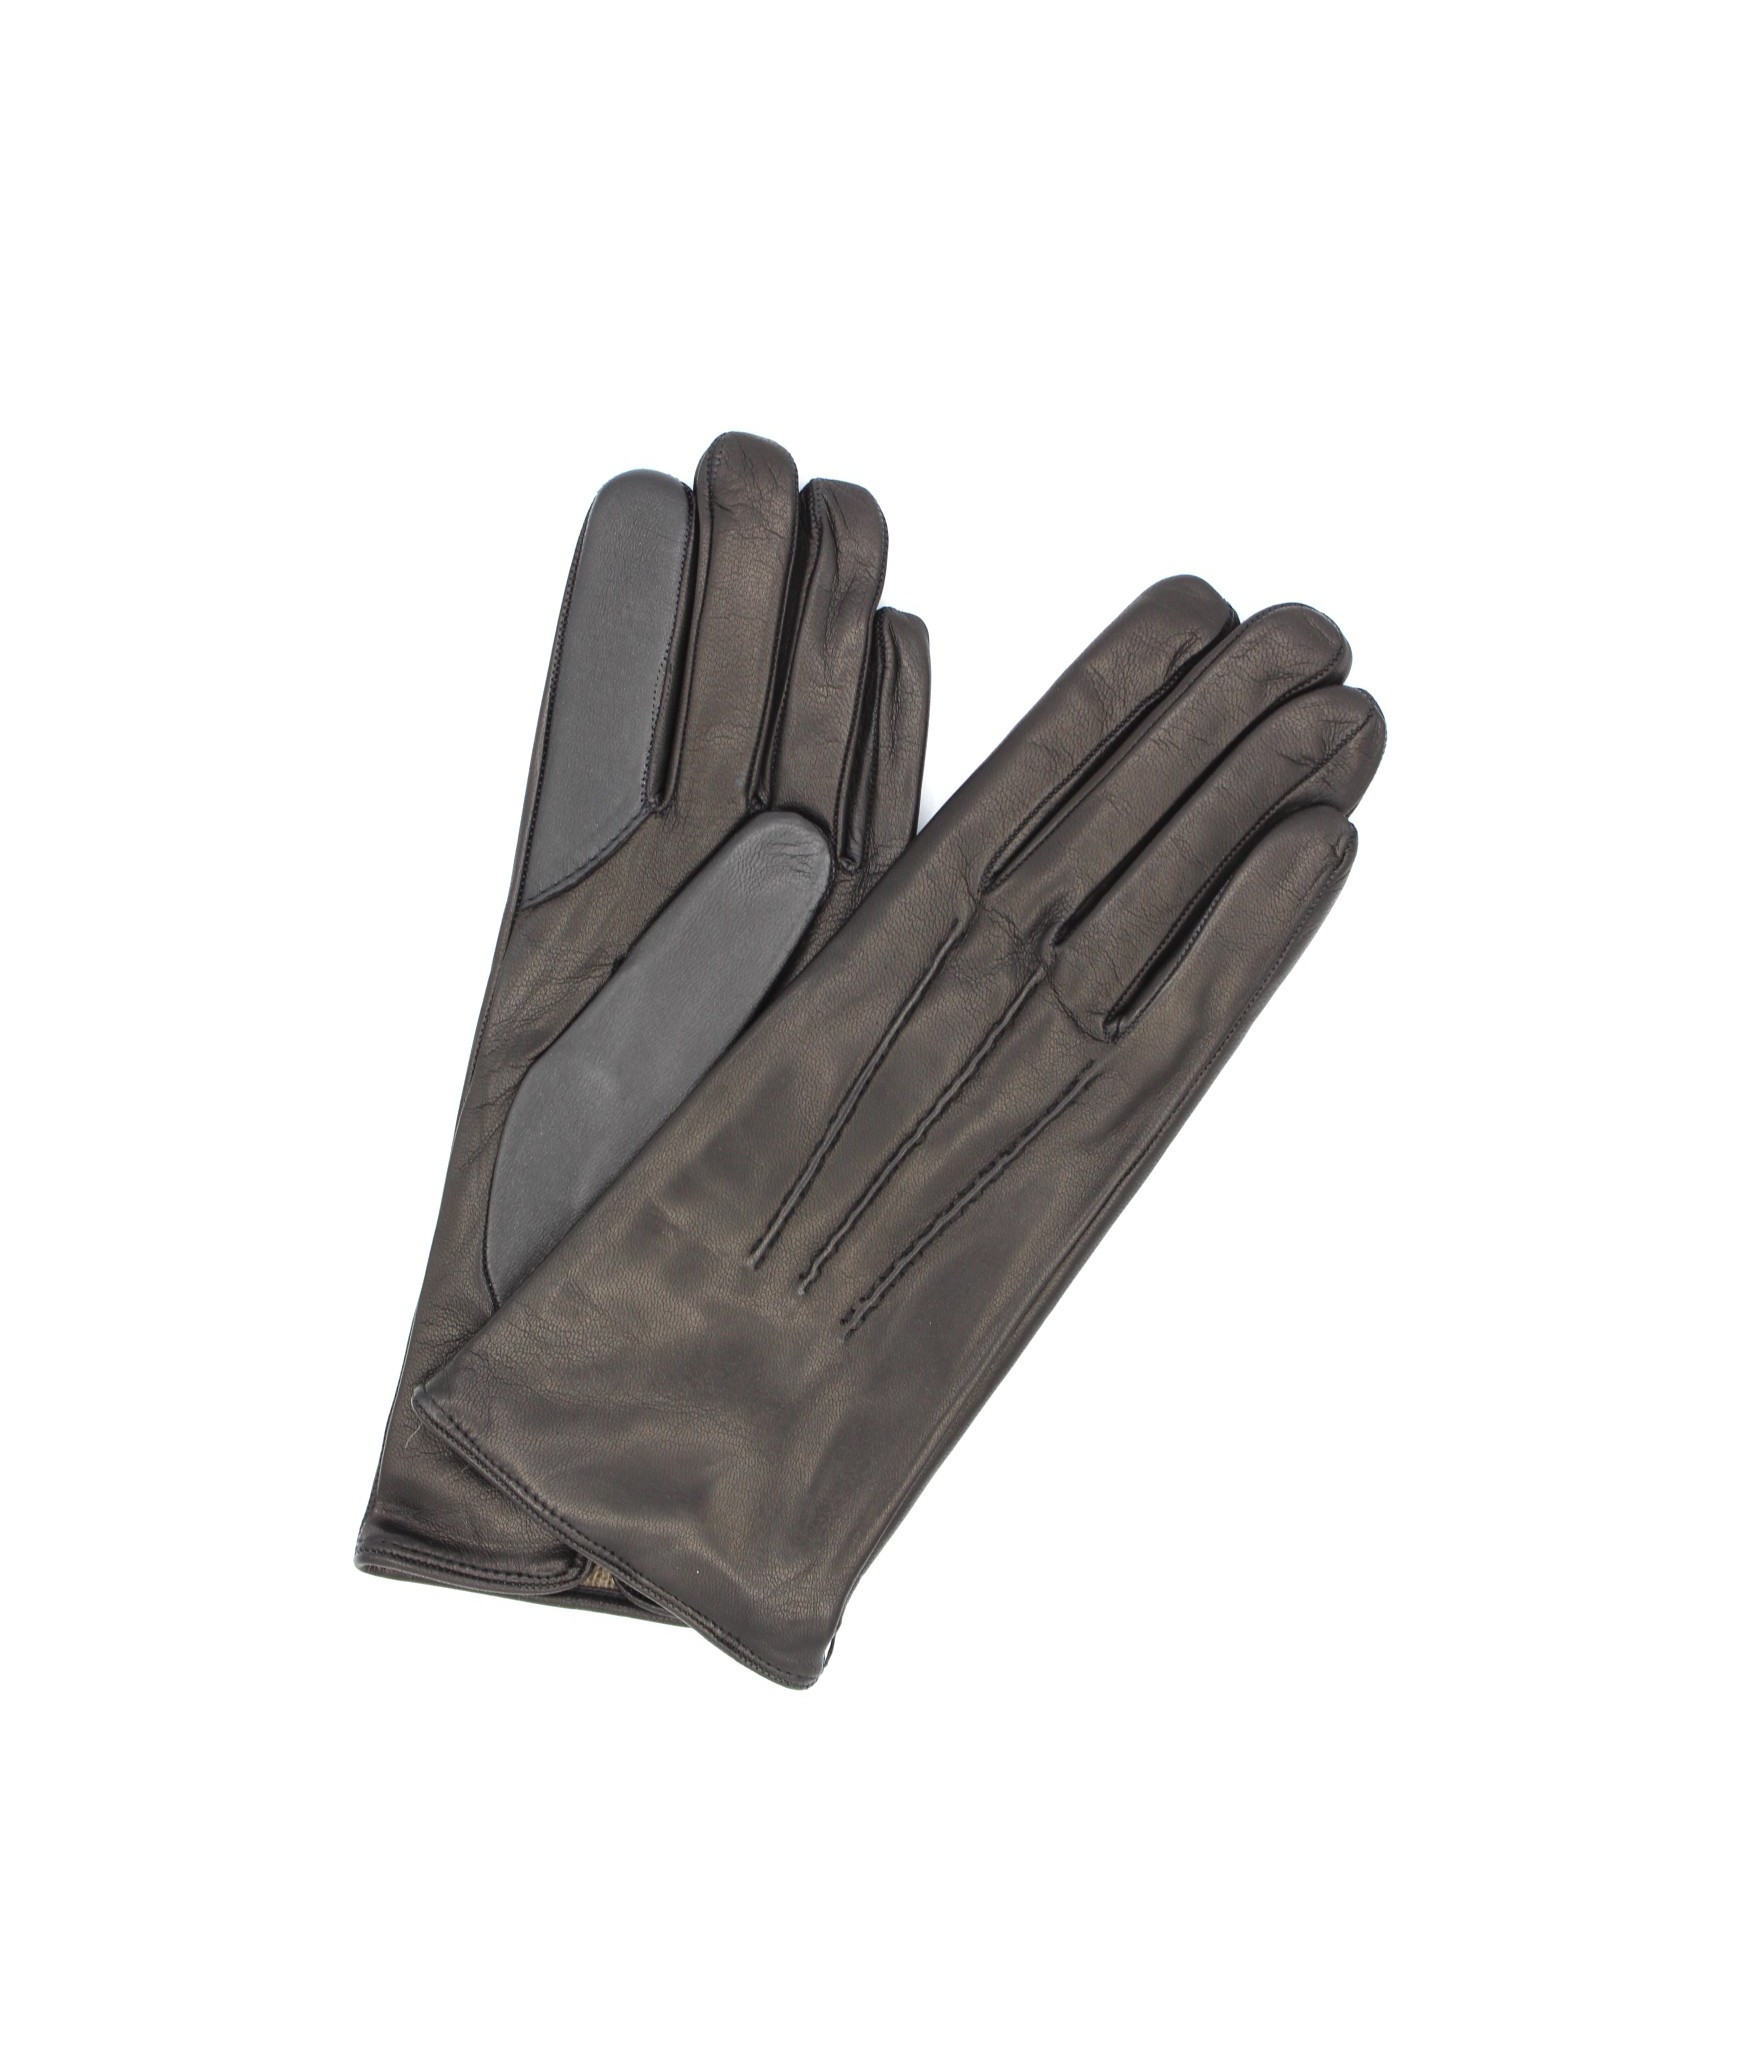 1953 Kid Leather Glove Cashmere Lined Touch Screen Black 